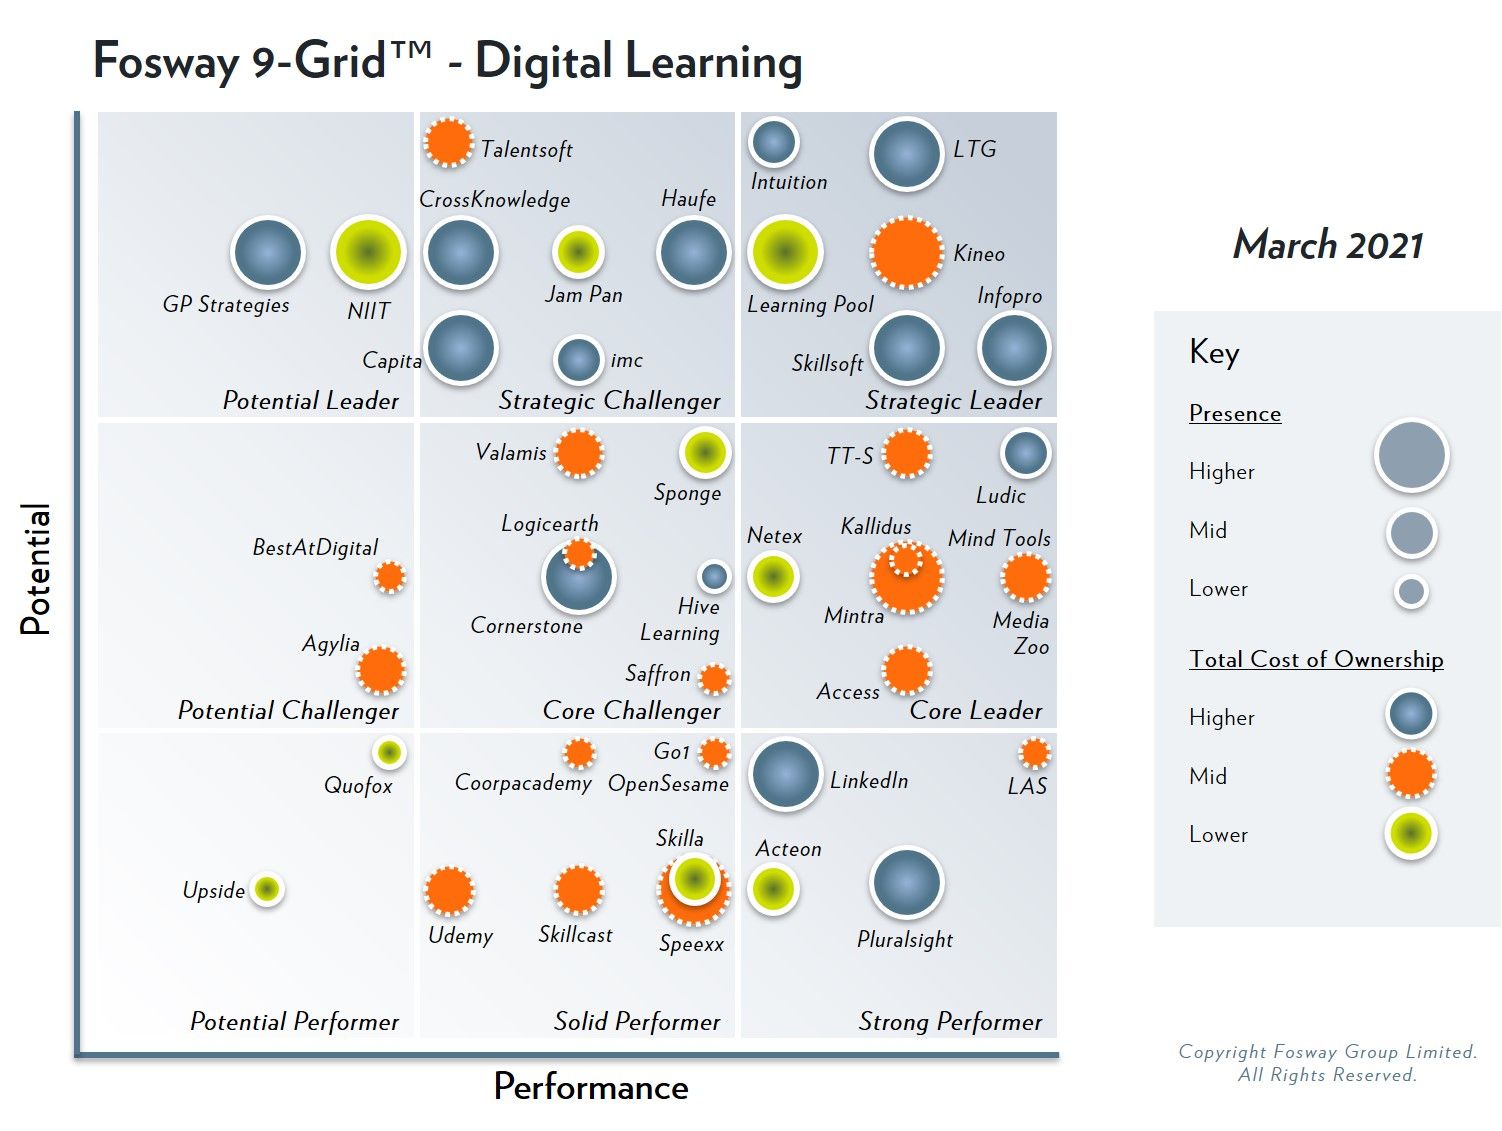 This is an image:Learning Technologies Group reinforces position as Strategic Leader in Digital Learning in 2021 Fosway 9-Grid™